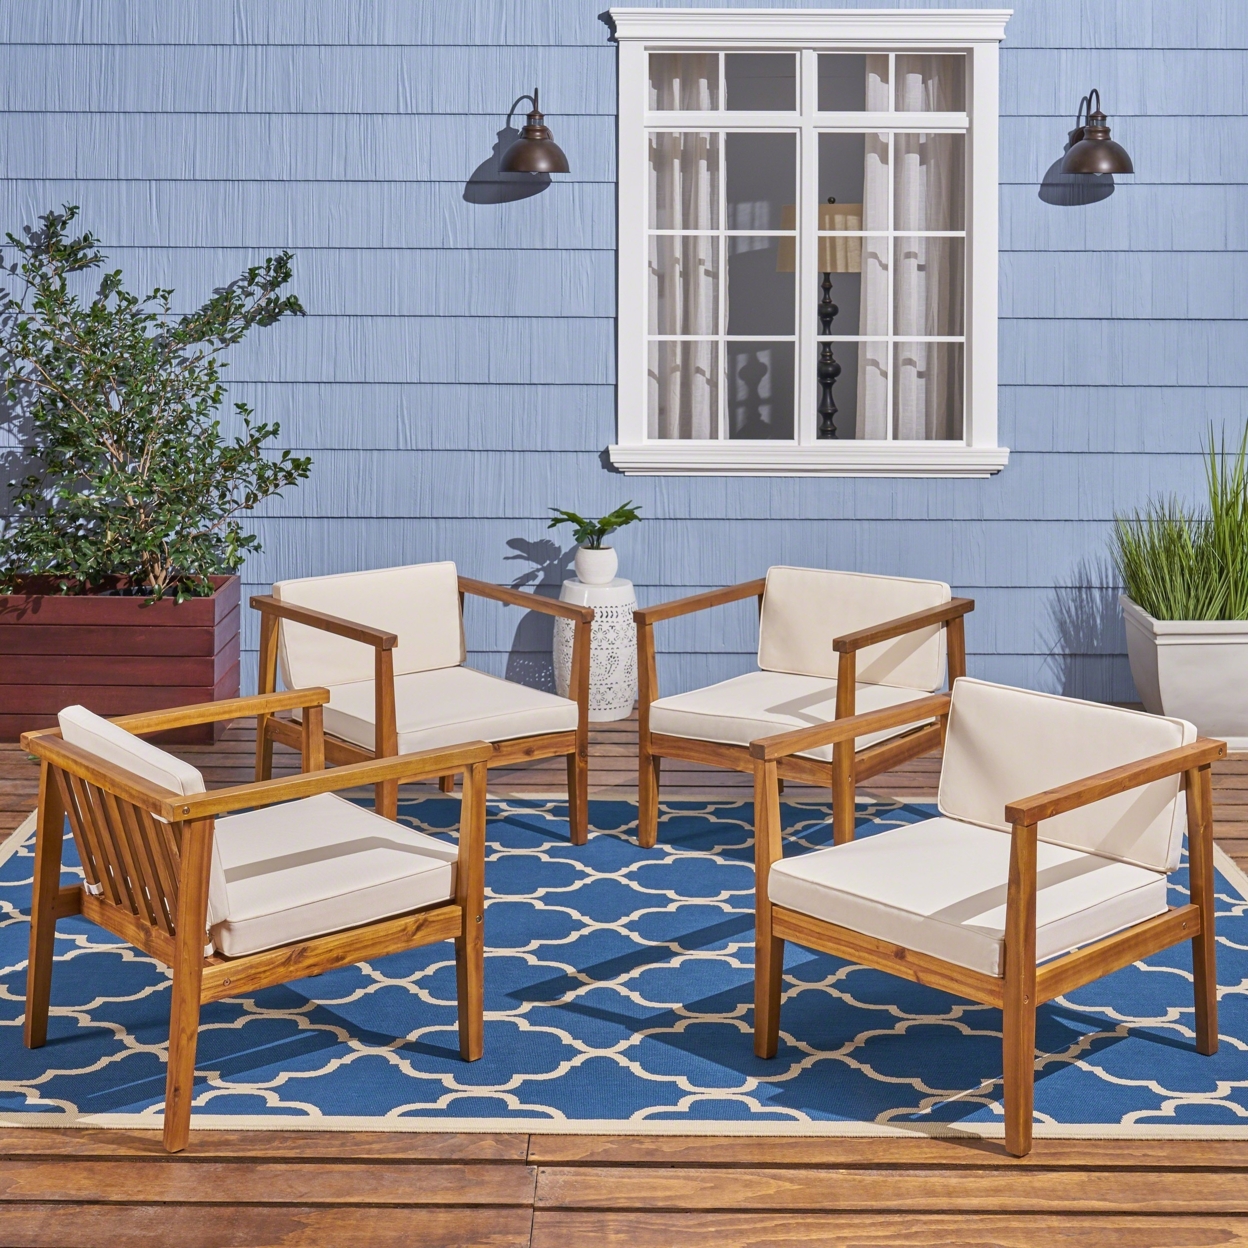 Thomson Outdoor Acacia Wood Club Chairs With Water-Resistant Cushions (Set Of 4) - Teak / Dark Teal